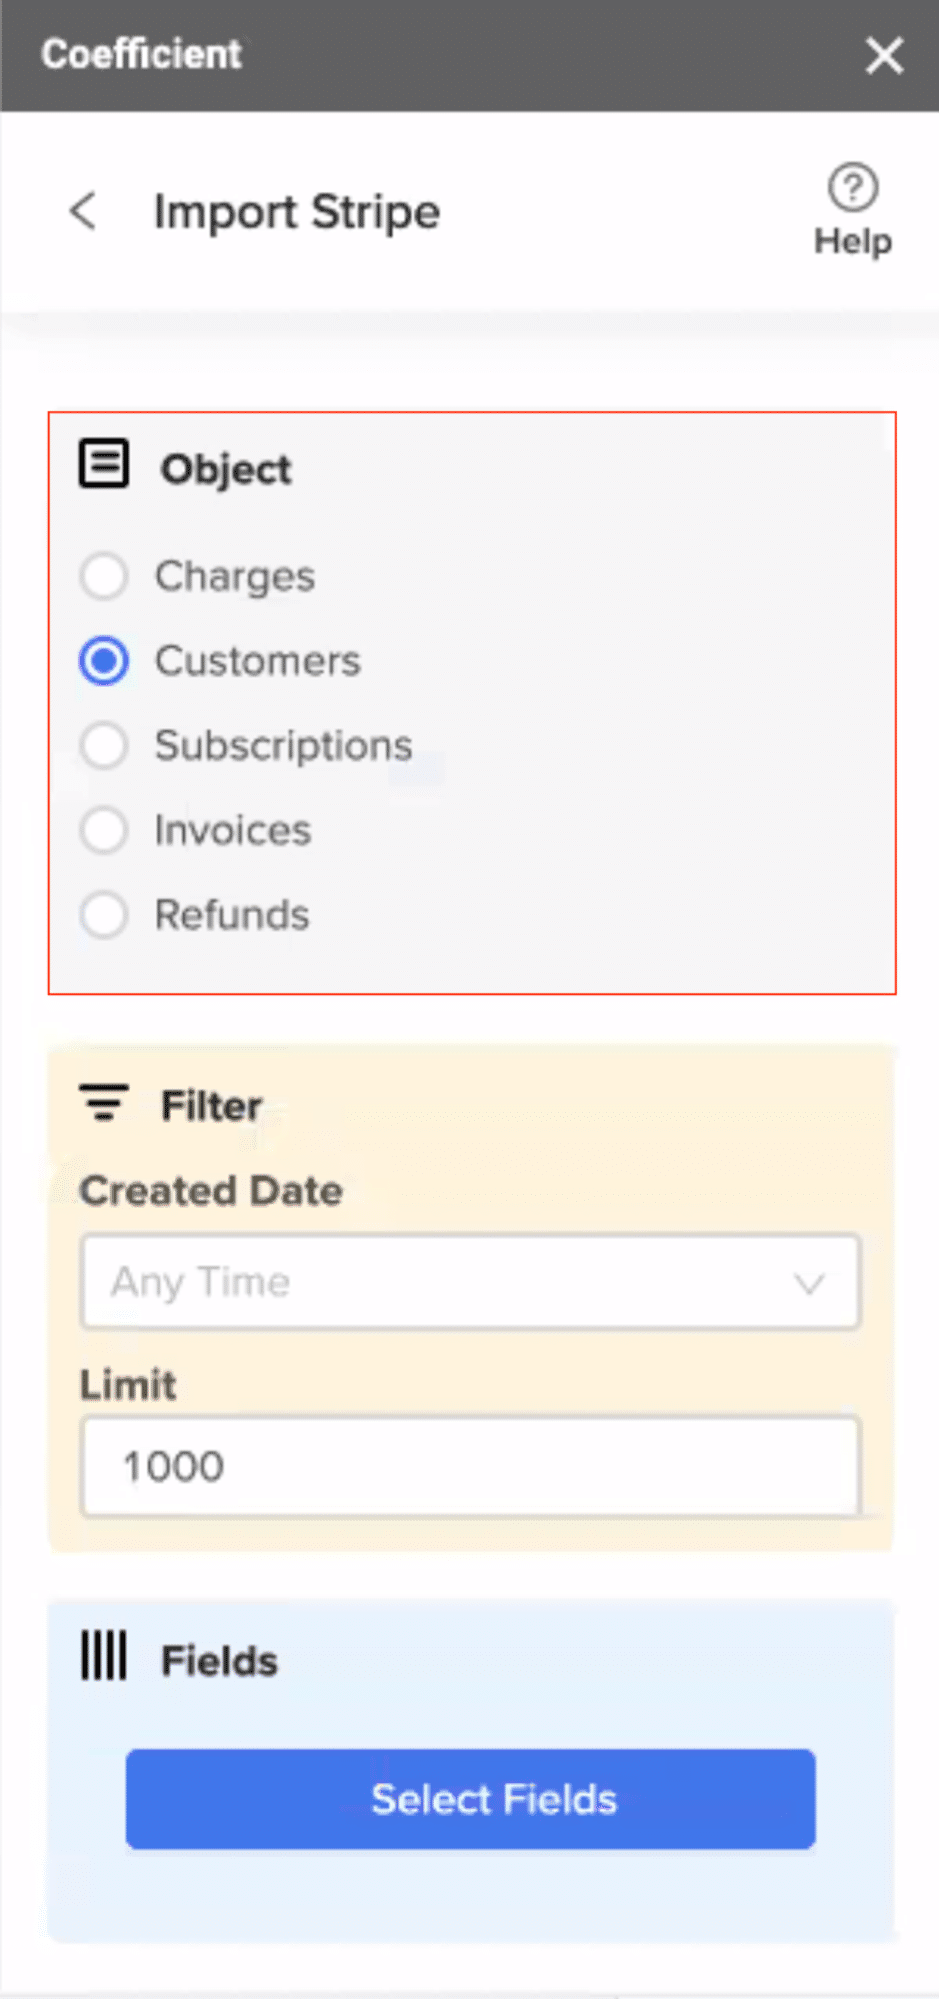 Selecting the Object to import (e.g., ‘Customers’) in the Coefficient sidebar.